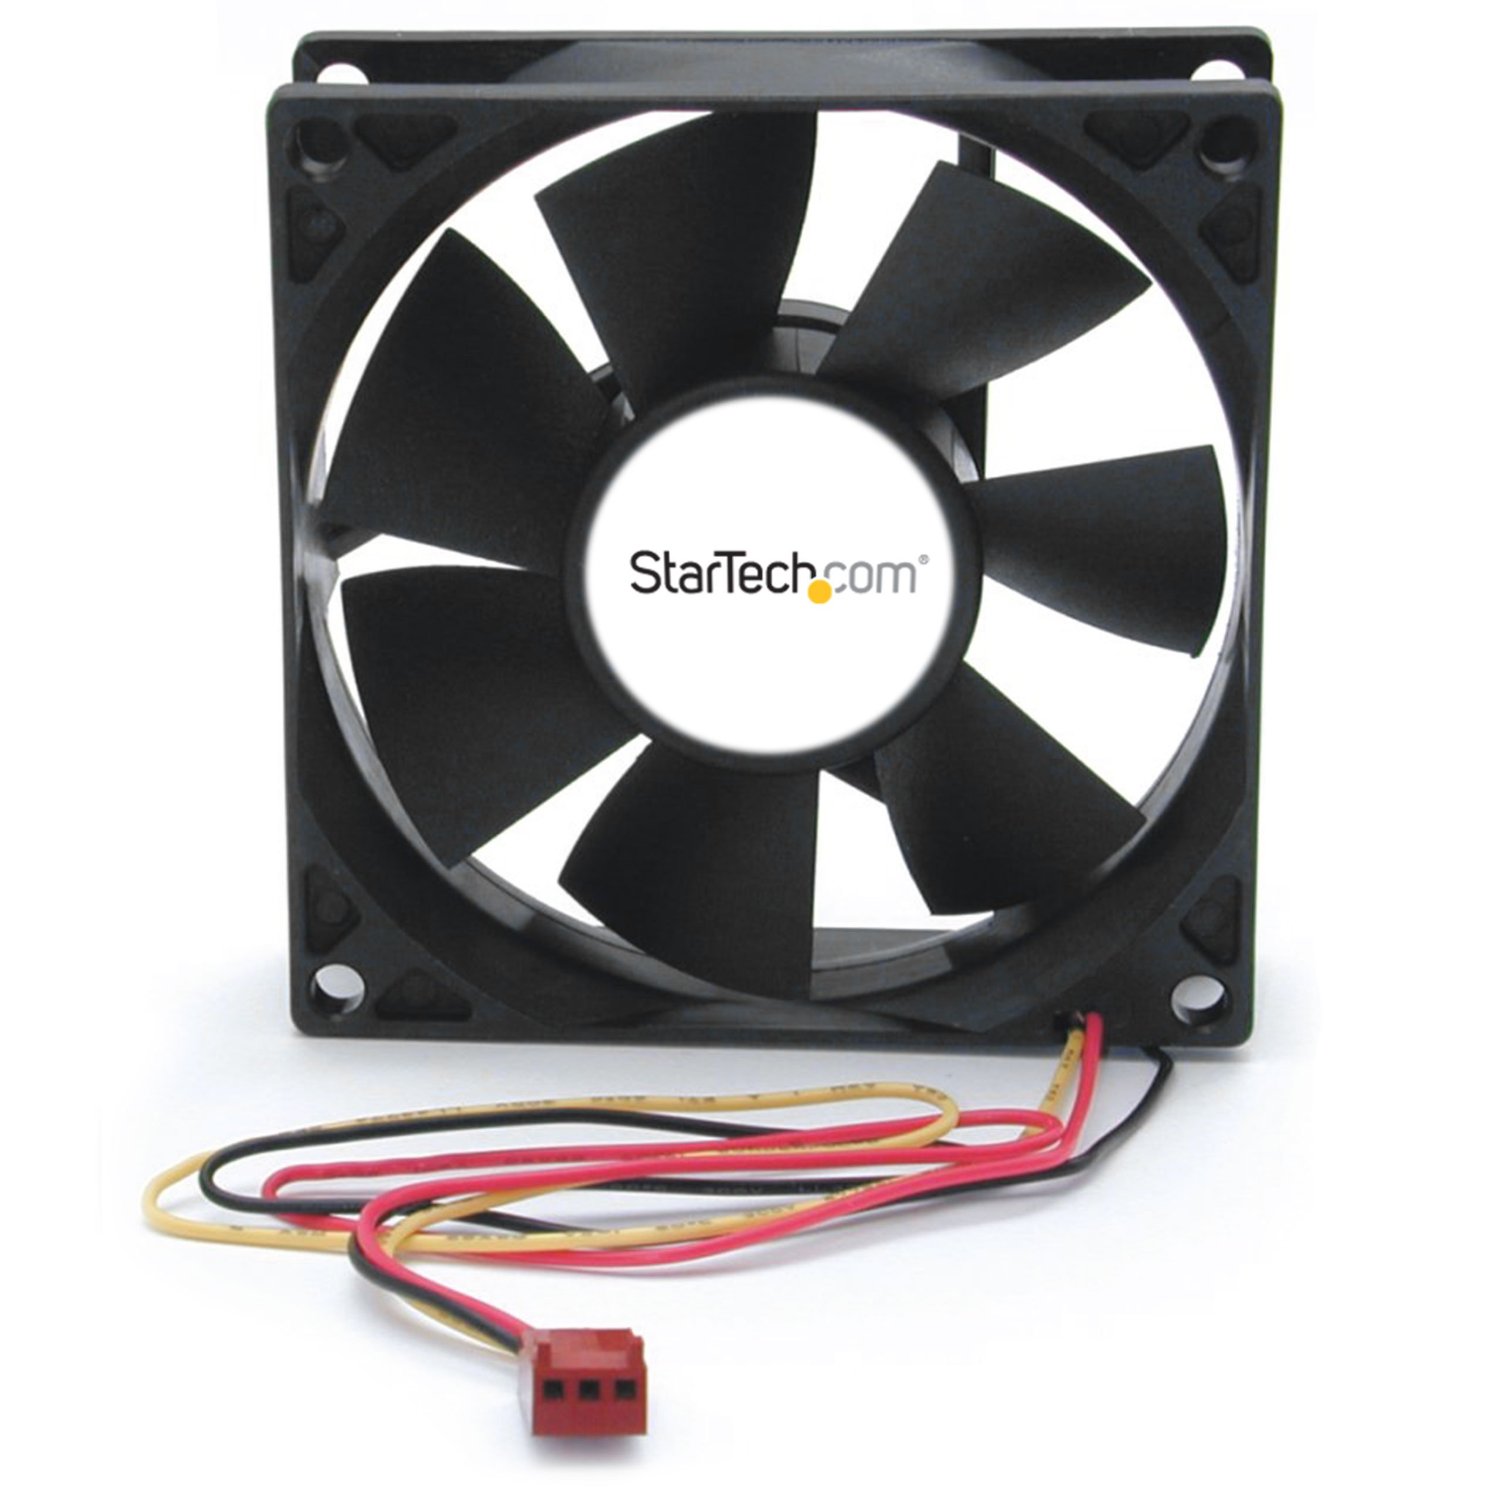 80x25mm Dual Ball Bearing Computer Case Fan with TX3 Connector